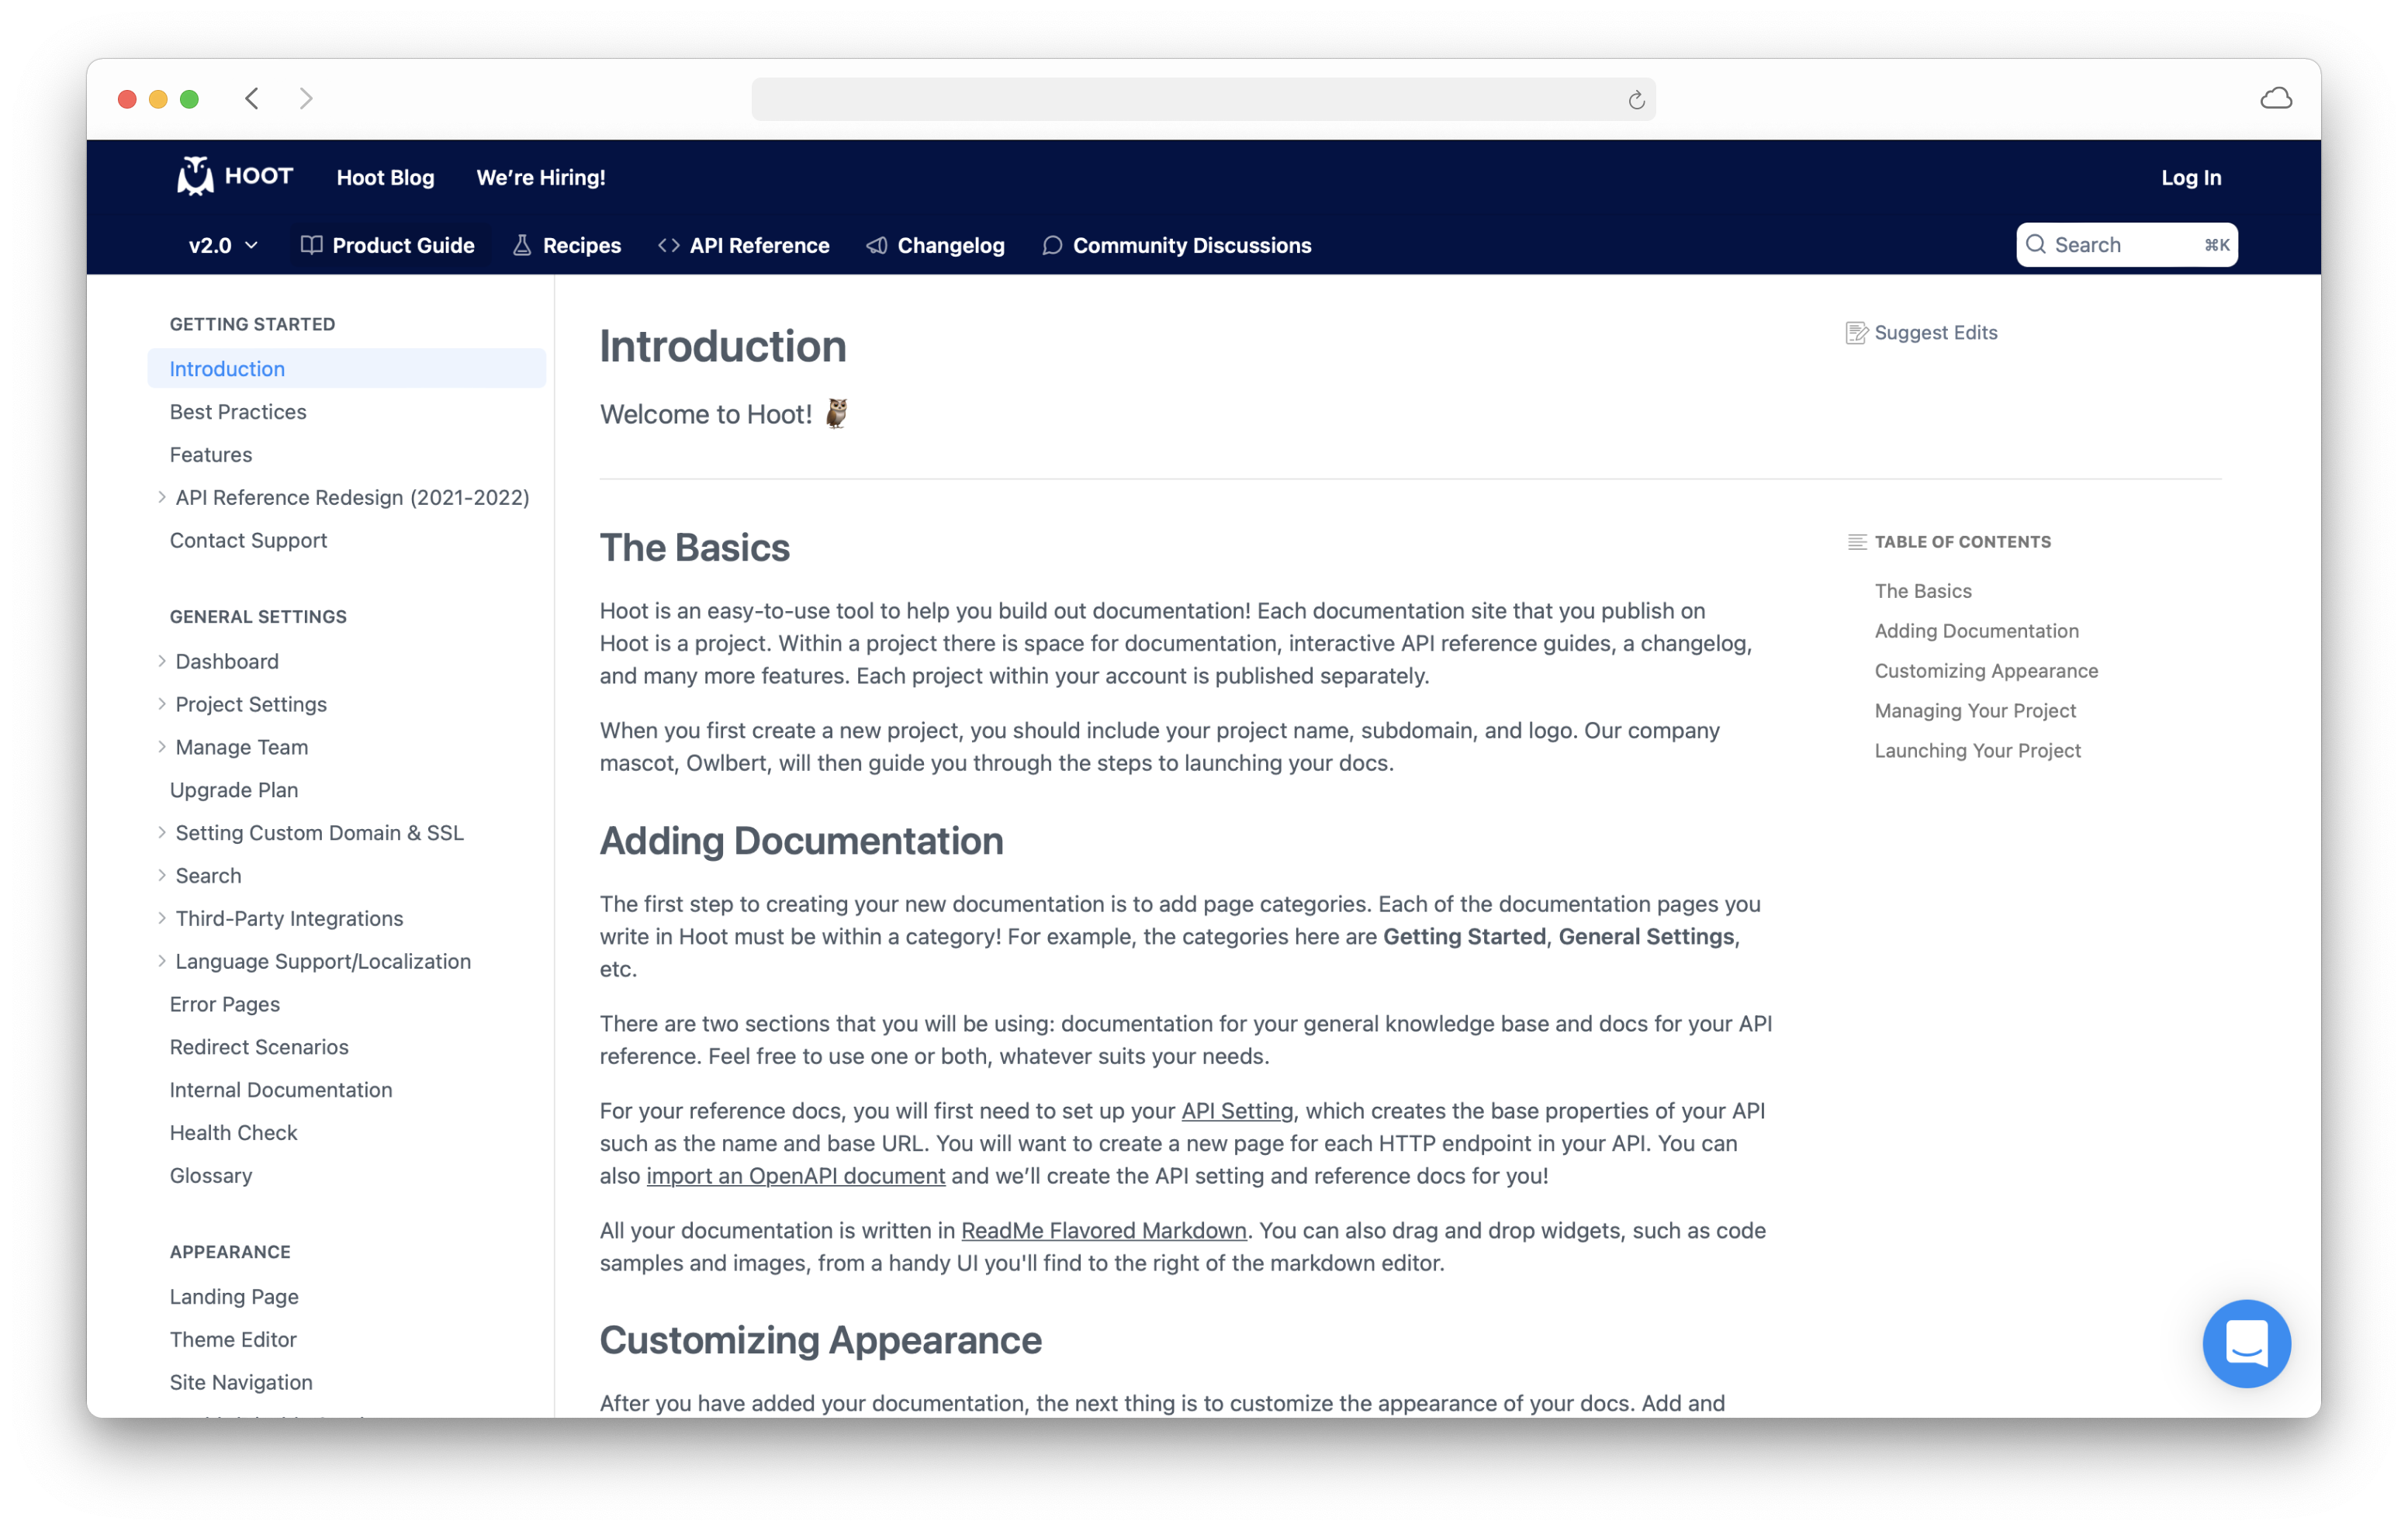 Developer Guides: Explain important concepts to help developers get started and understand what's possible with your API. Native search, rich content embeds, and easy navigation make ReadMe the top choice for user experience.